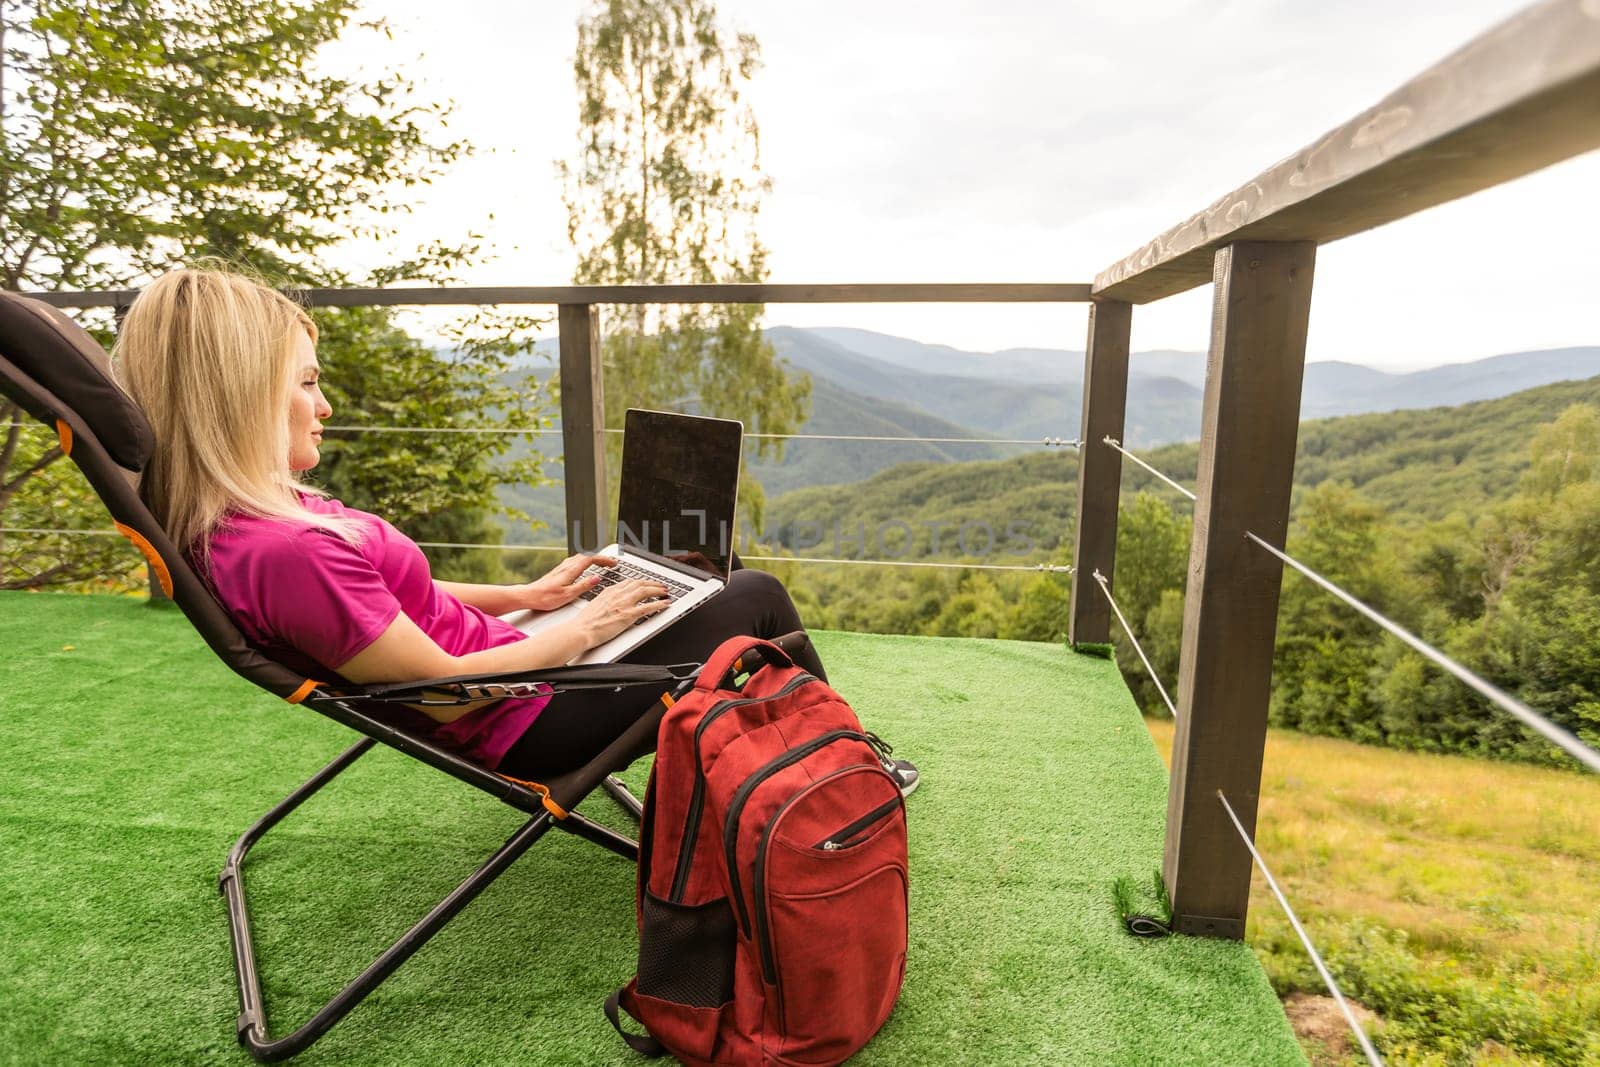 Young business woman working at the computer on the rock. Young girl downshifter working at a laptop at sunset or sunrise on the top of the mountain, working day